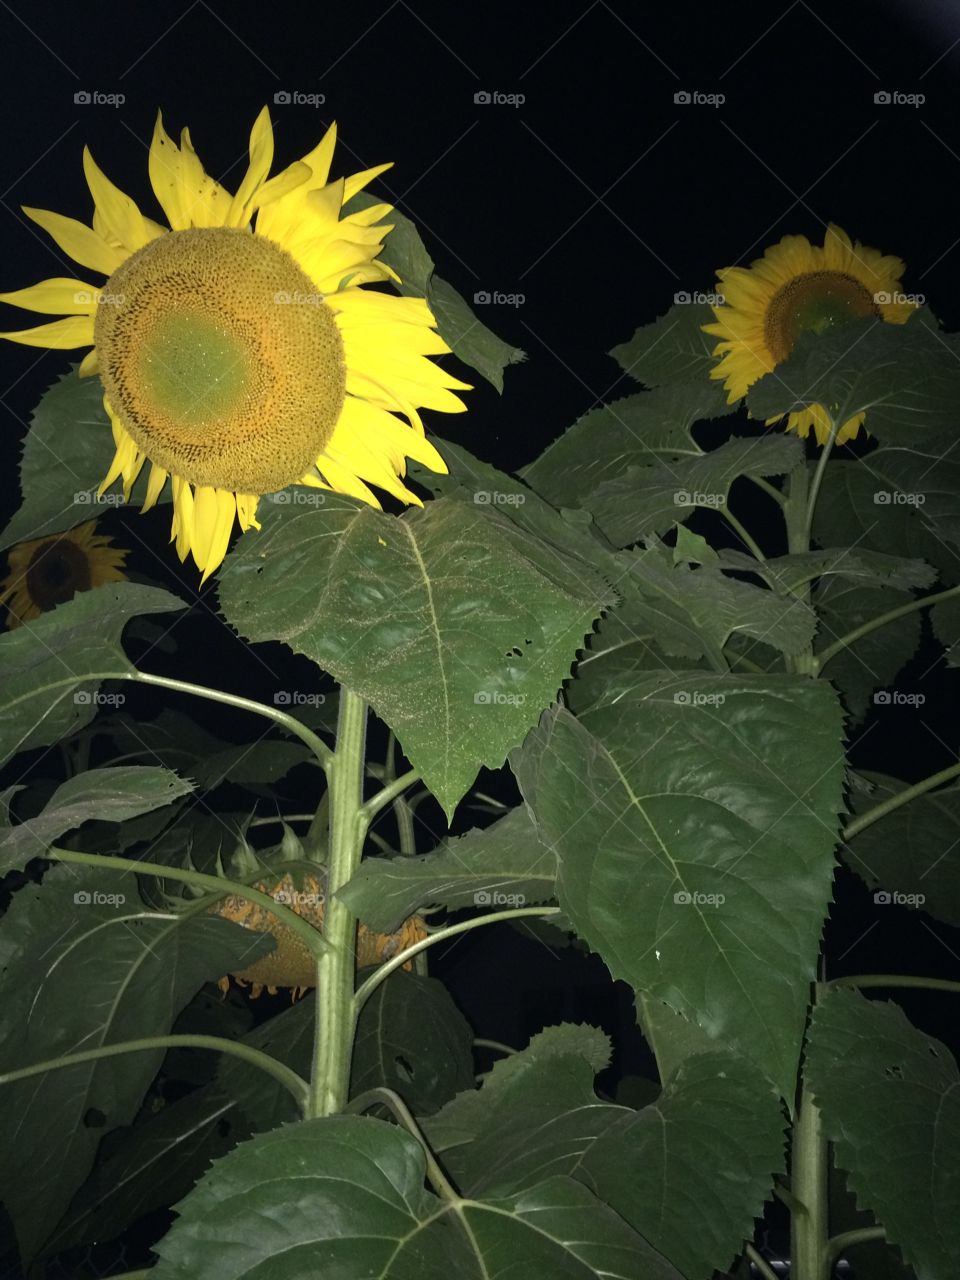 More sunflowers at night